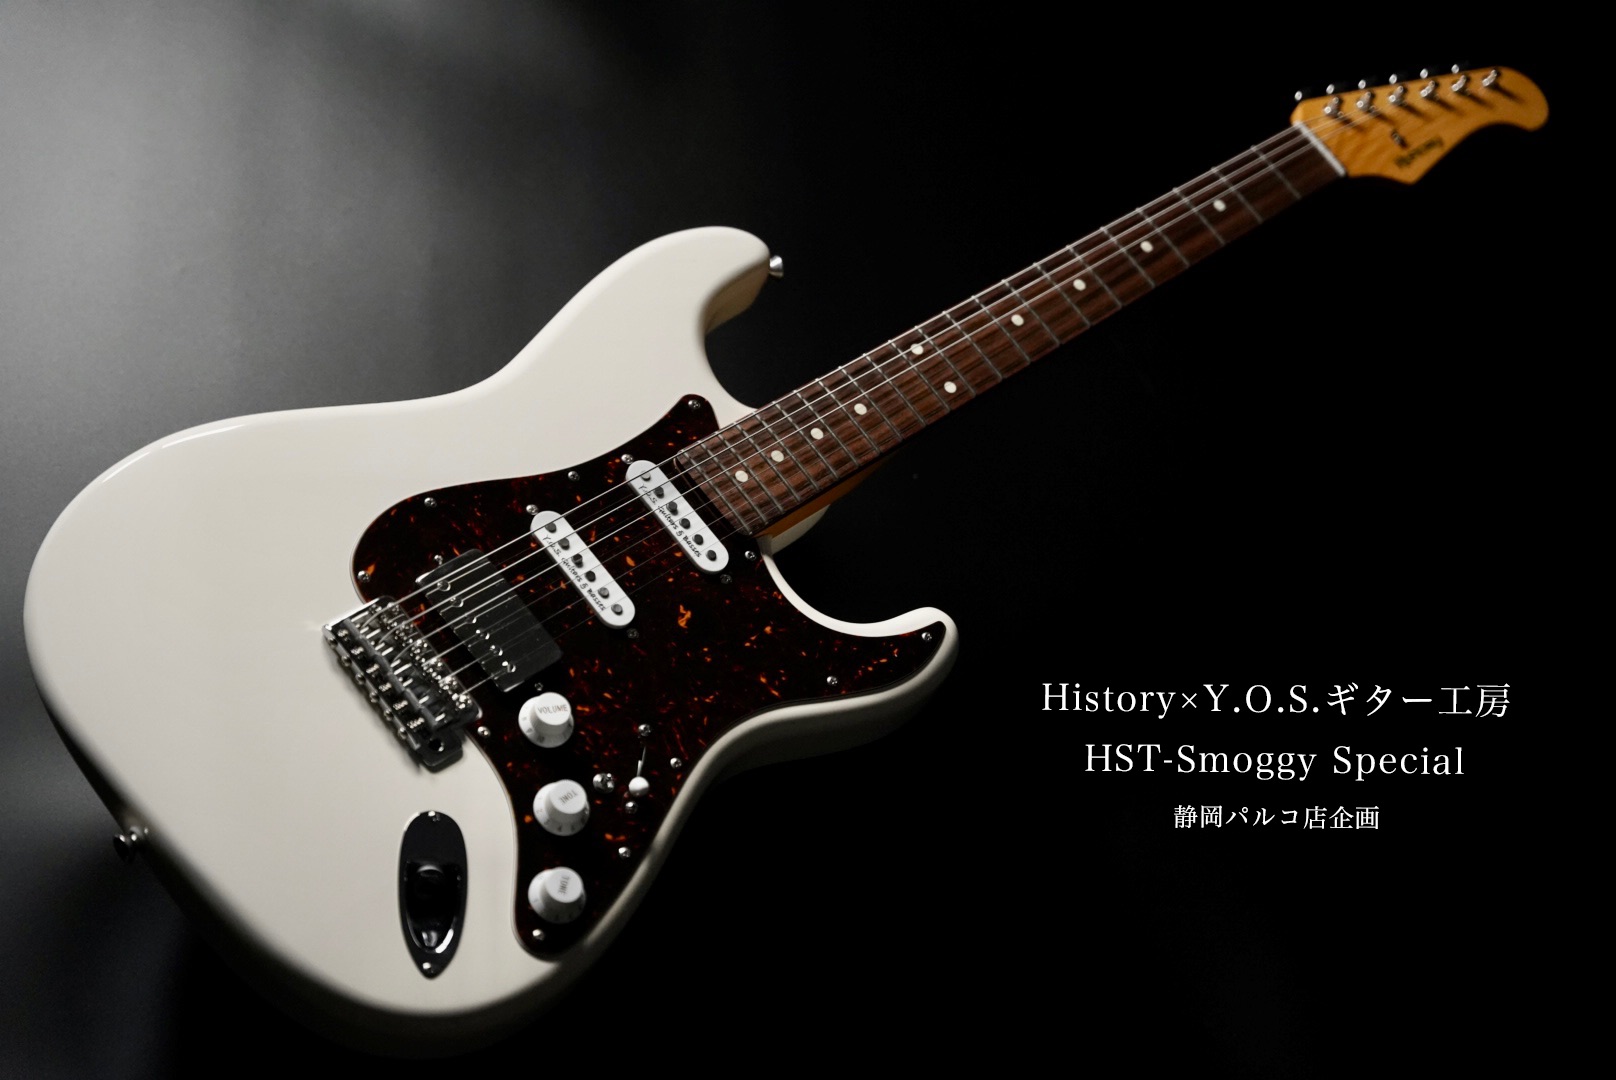 HISTORY×Y.O.S.ギター工房 コラボレーションモデル「HST-Smoggy Special」